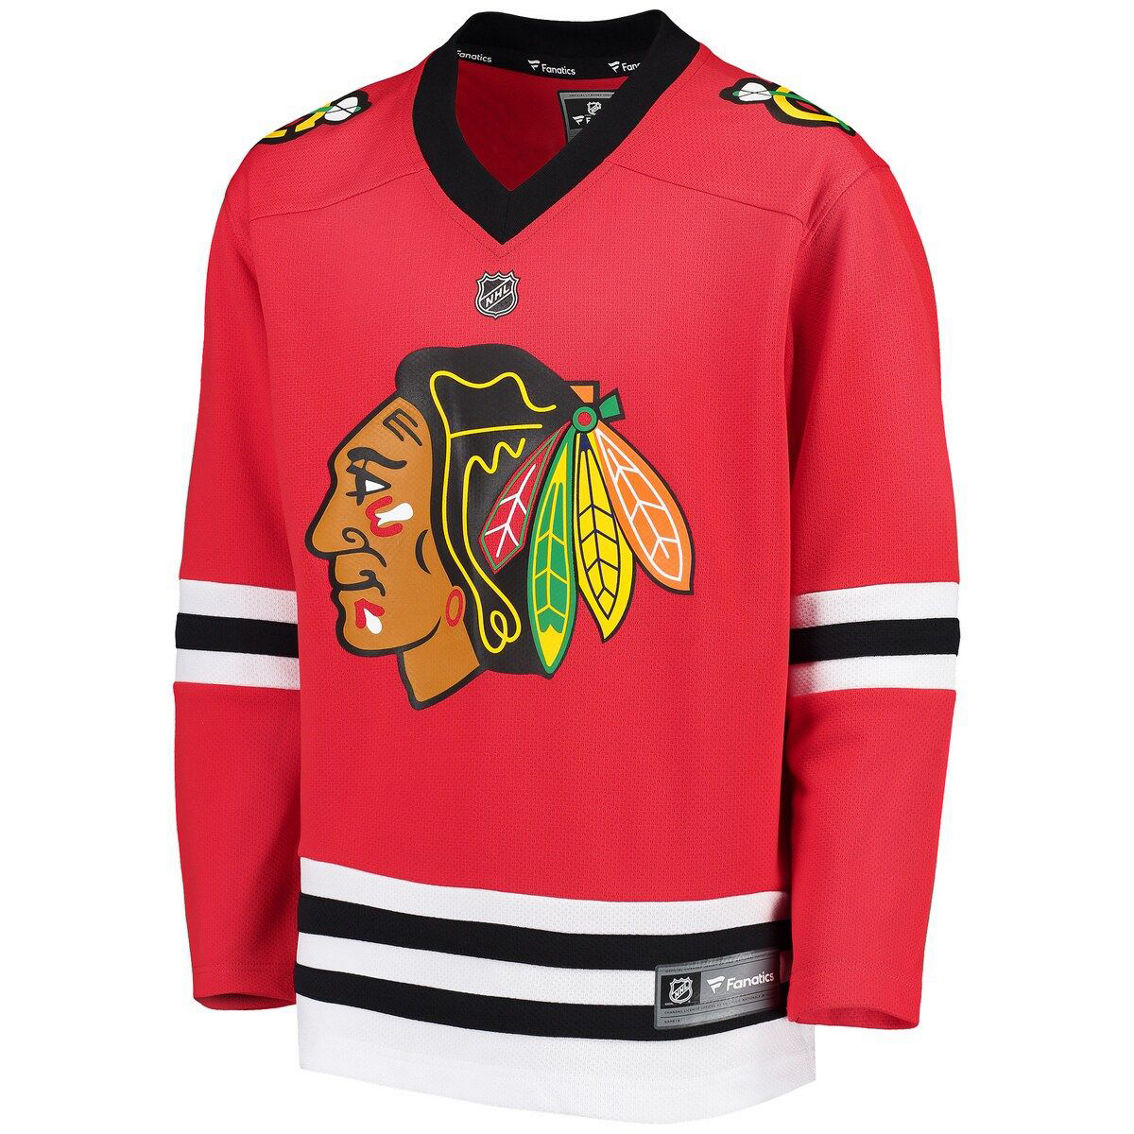 Fanatics Branded Youth Red Chicago Blackhawks Home Replica Blank Jersey - Image 3 of 4